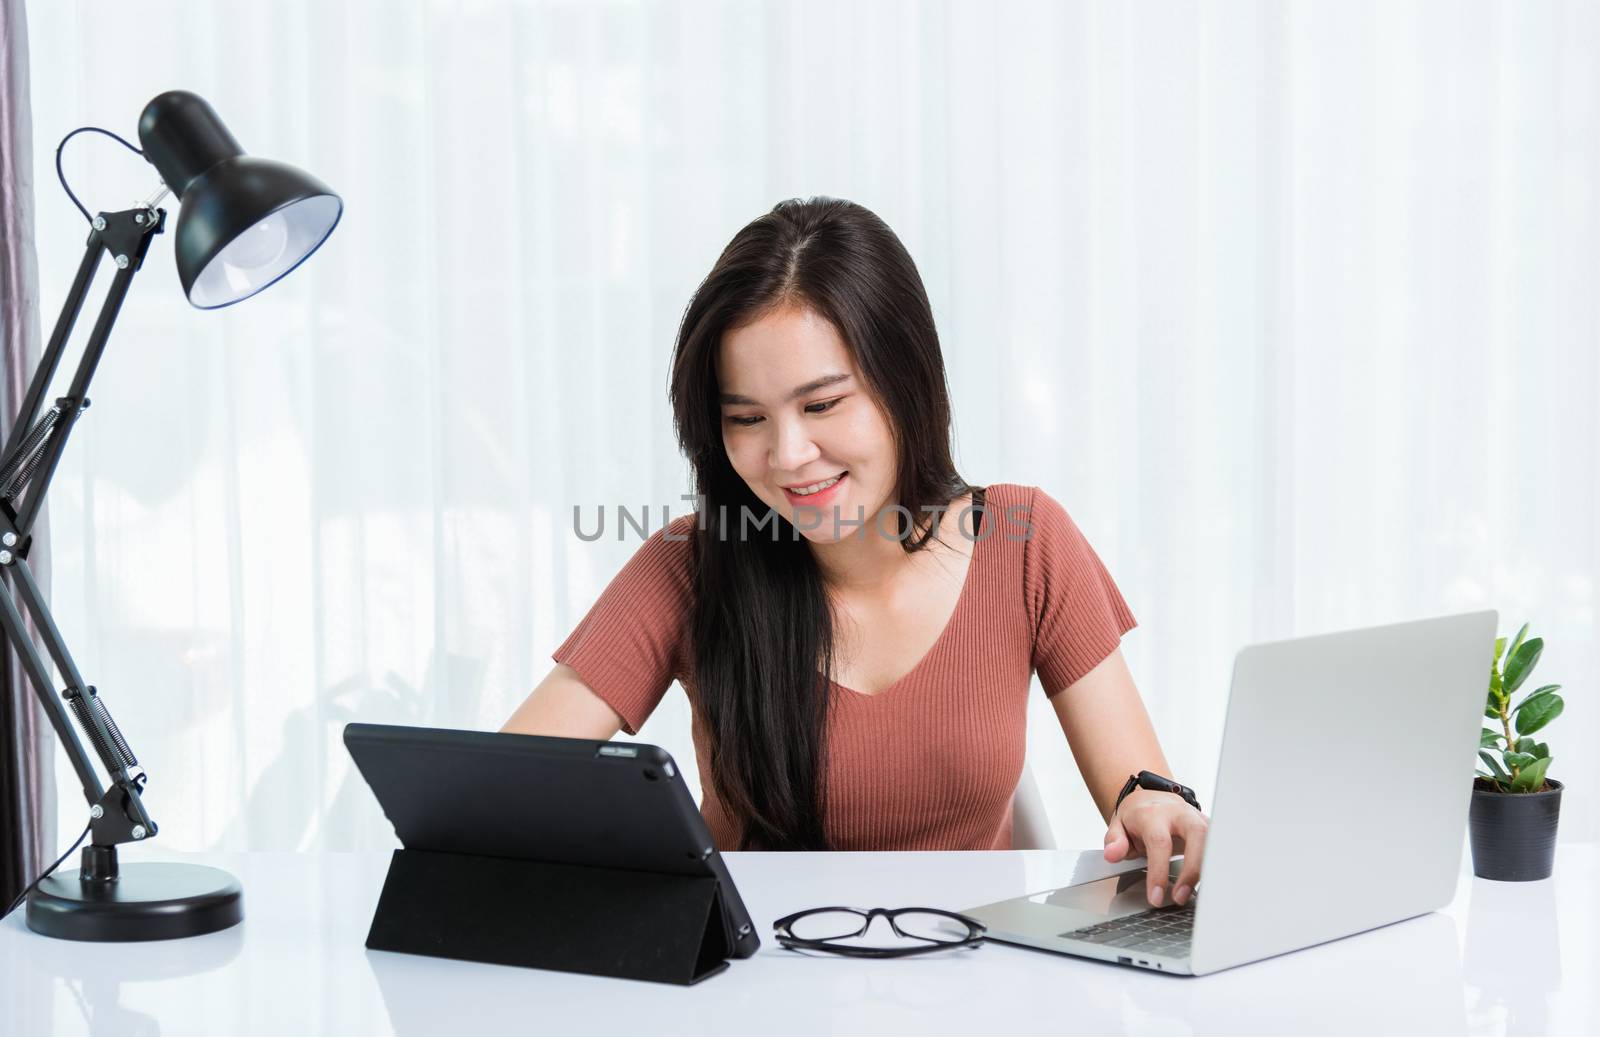 Business woman use smart tablet and laptop computer technology v by Sorapop